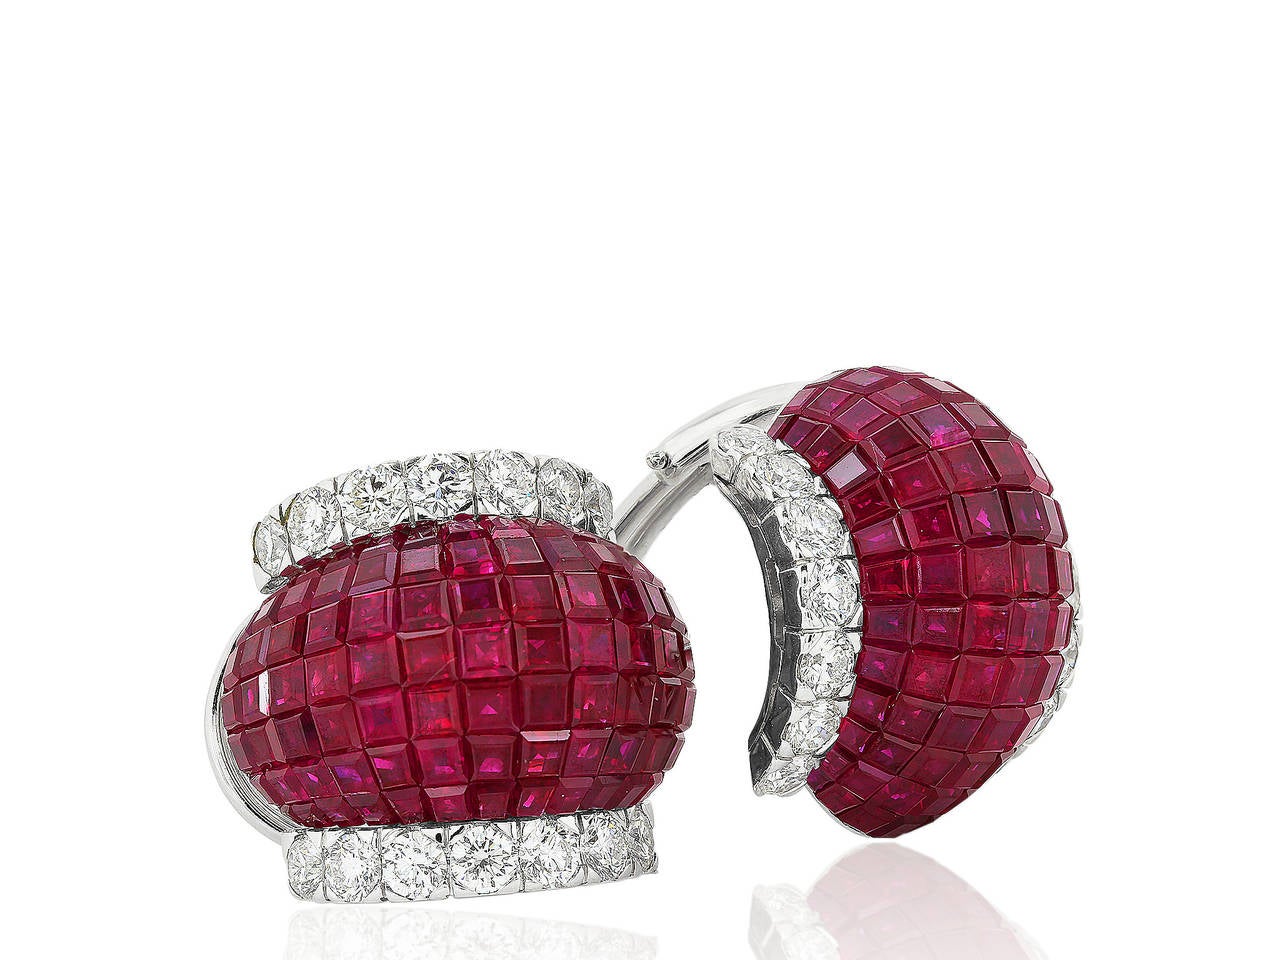 18 karat white gold clip earrings consisting of 183 invisible set rubies having a total weight 19.63 carats set with 28 round brilliant cut diamonds having a total weight of 2.99 carats.